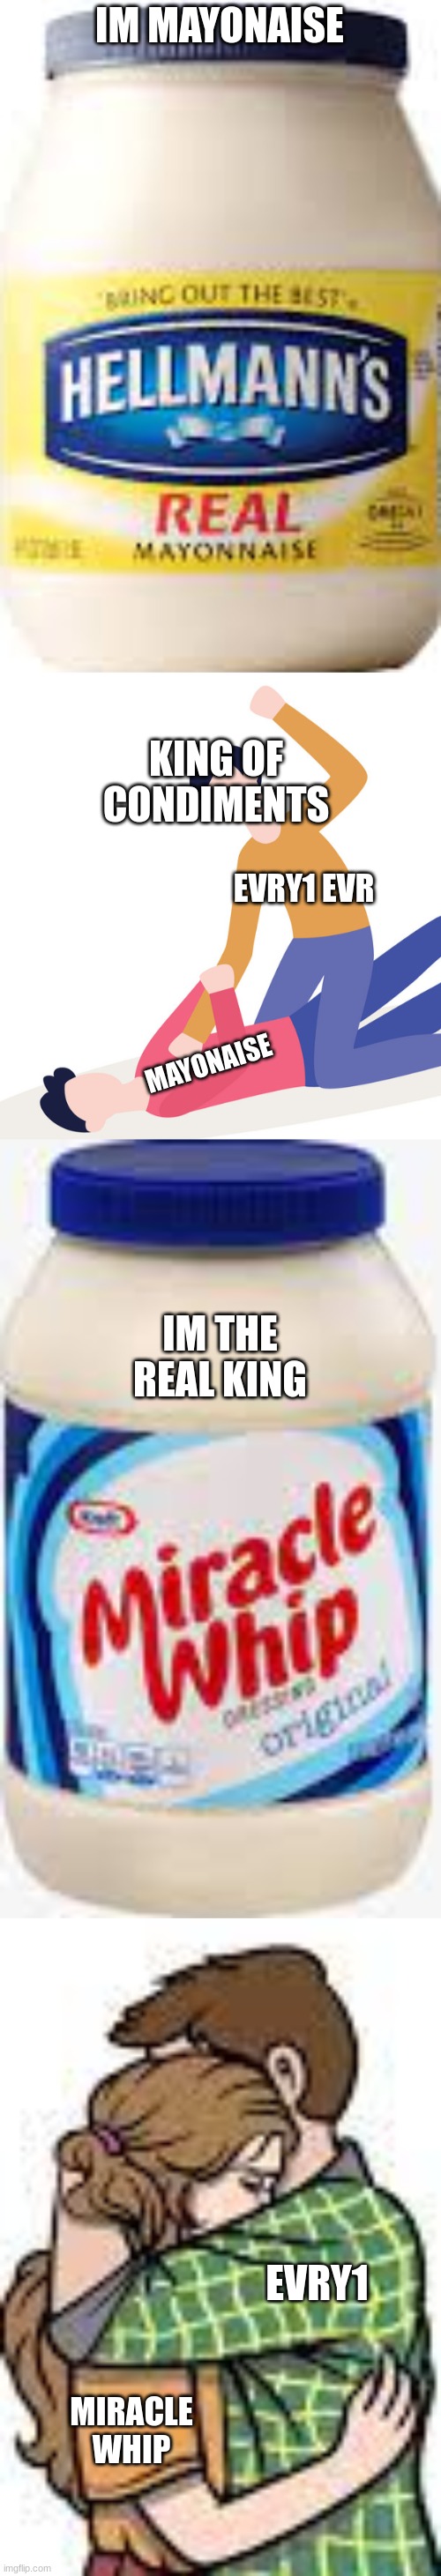 IM MAYONAISE; KING OF CONDIMENTS; EVRY1 EVR; MAYONAISE; IM THE REAL KING; EVRY1; MIRACLE WHIP | image tagged in condiments,chickens,hateing on mayo | made w/ Imgflip meme maker